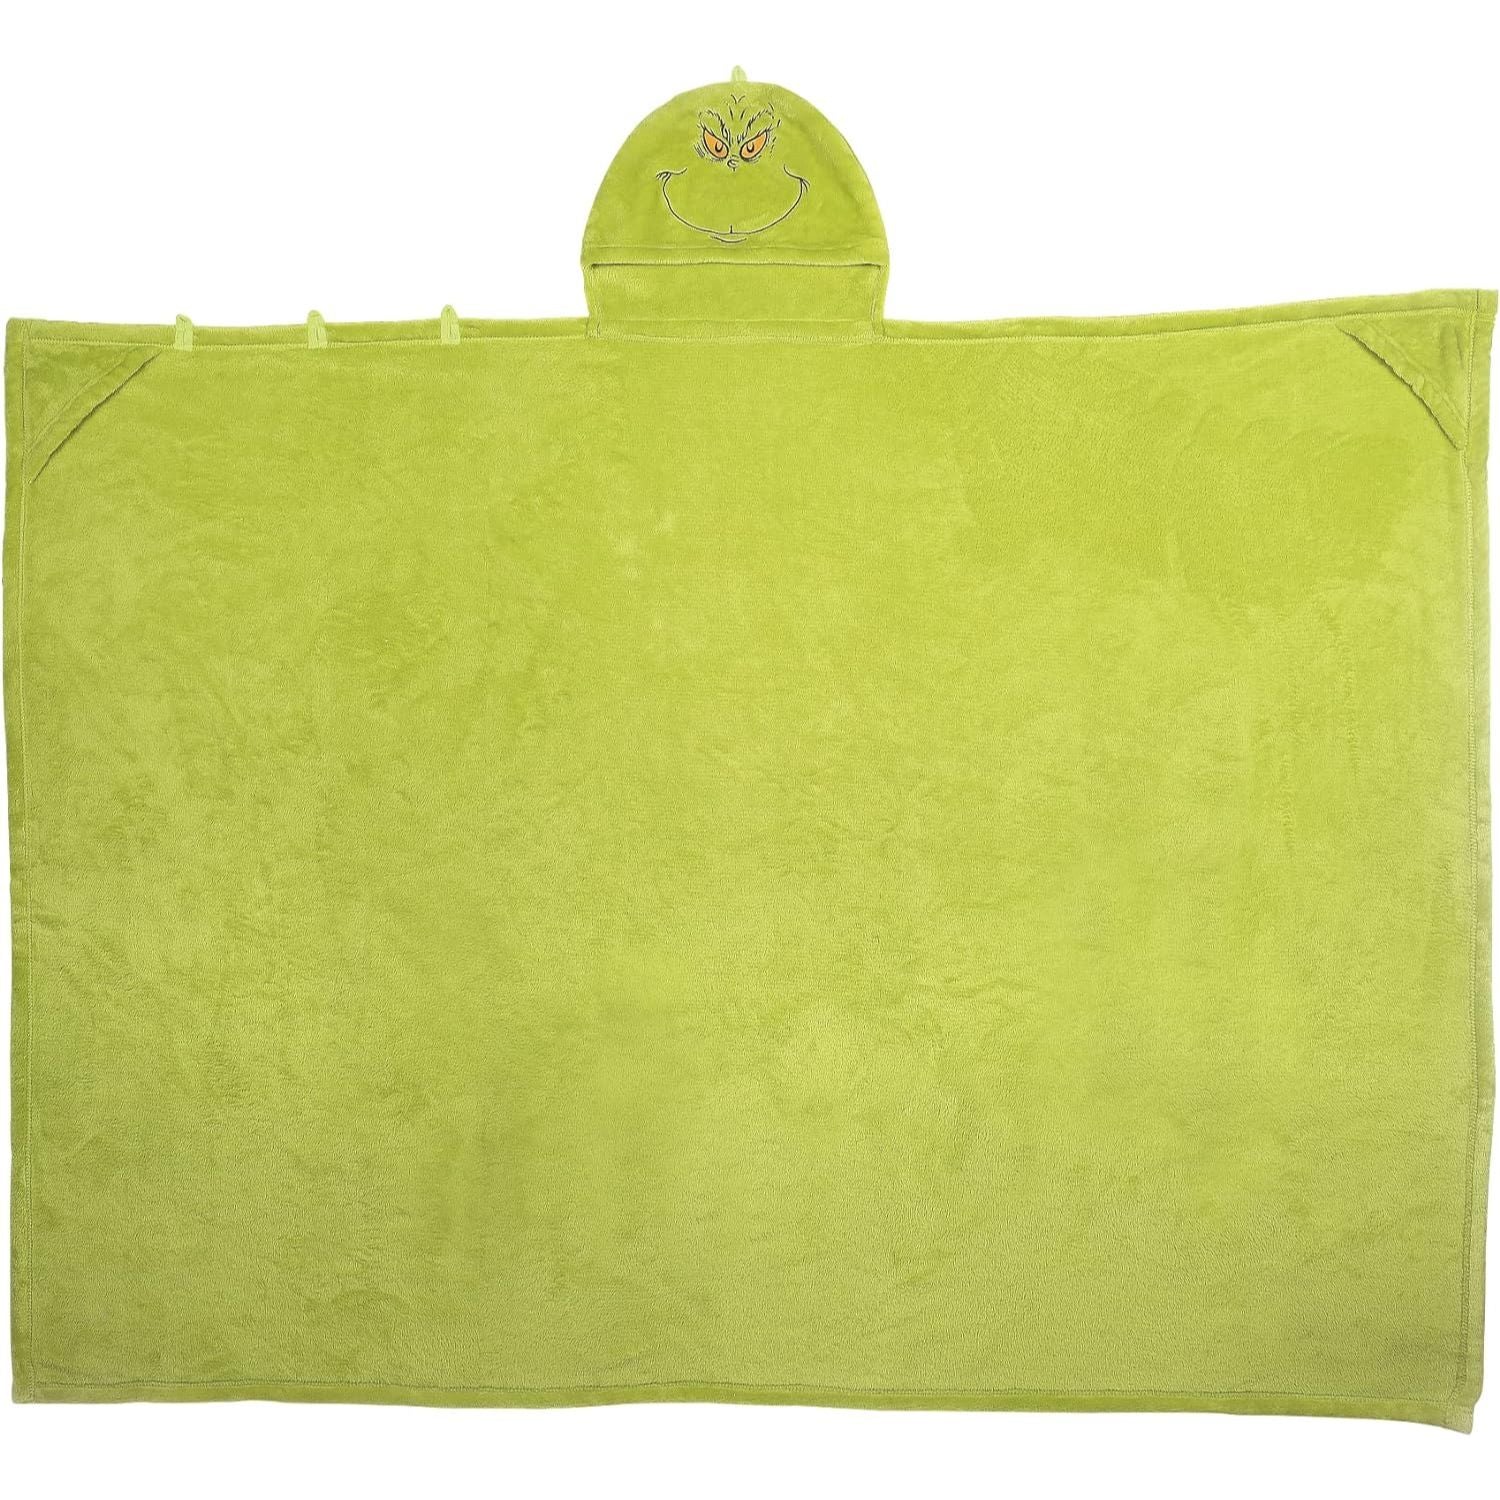 Department 56 Snowpinions Snow Throw The Grinch Super Soft Fleece Hooded Blanket, 45x60